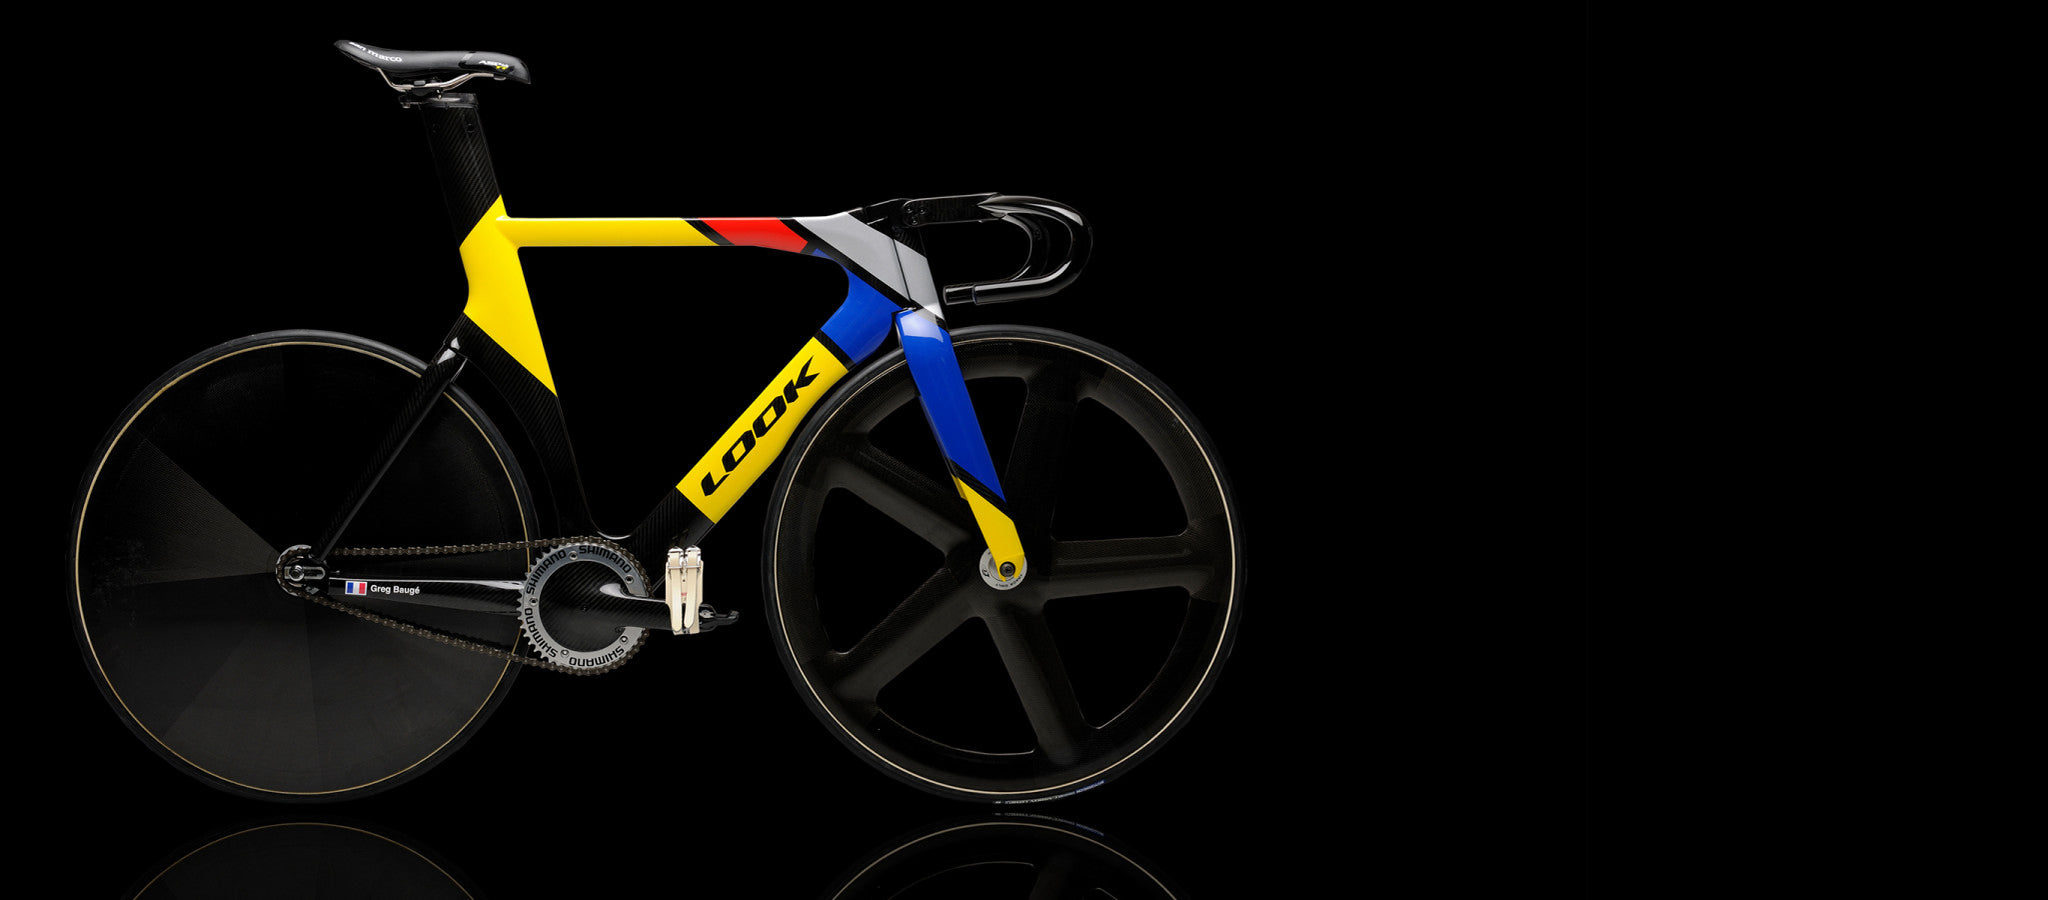 LOOK's Beautiful Bikes: Why LOOK Bicycles have Mondrian colors | The ...